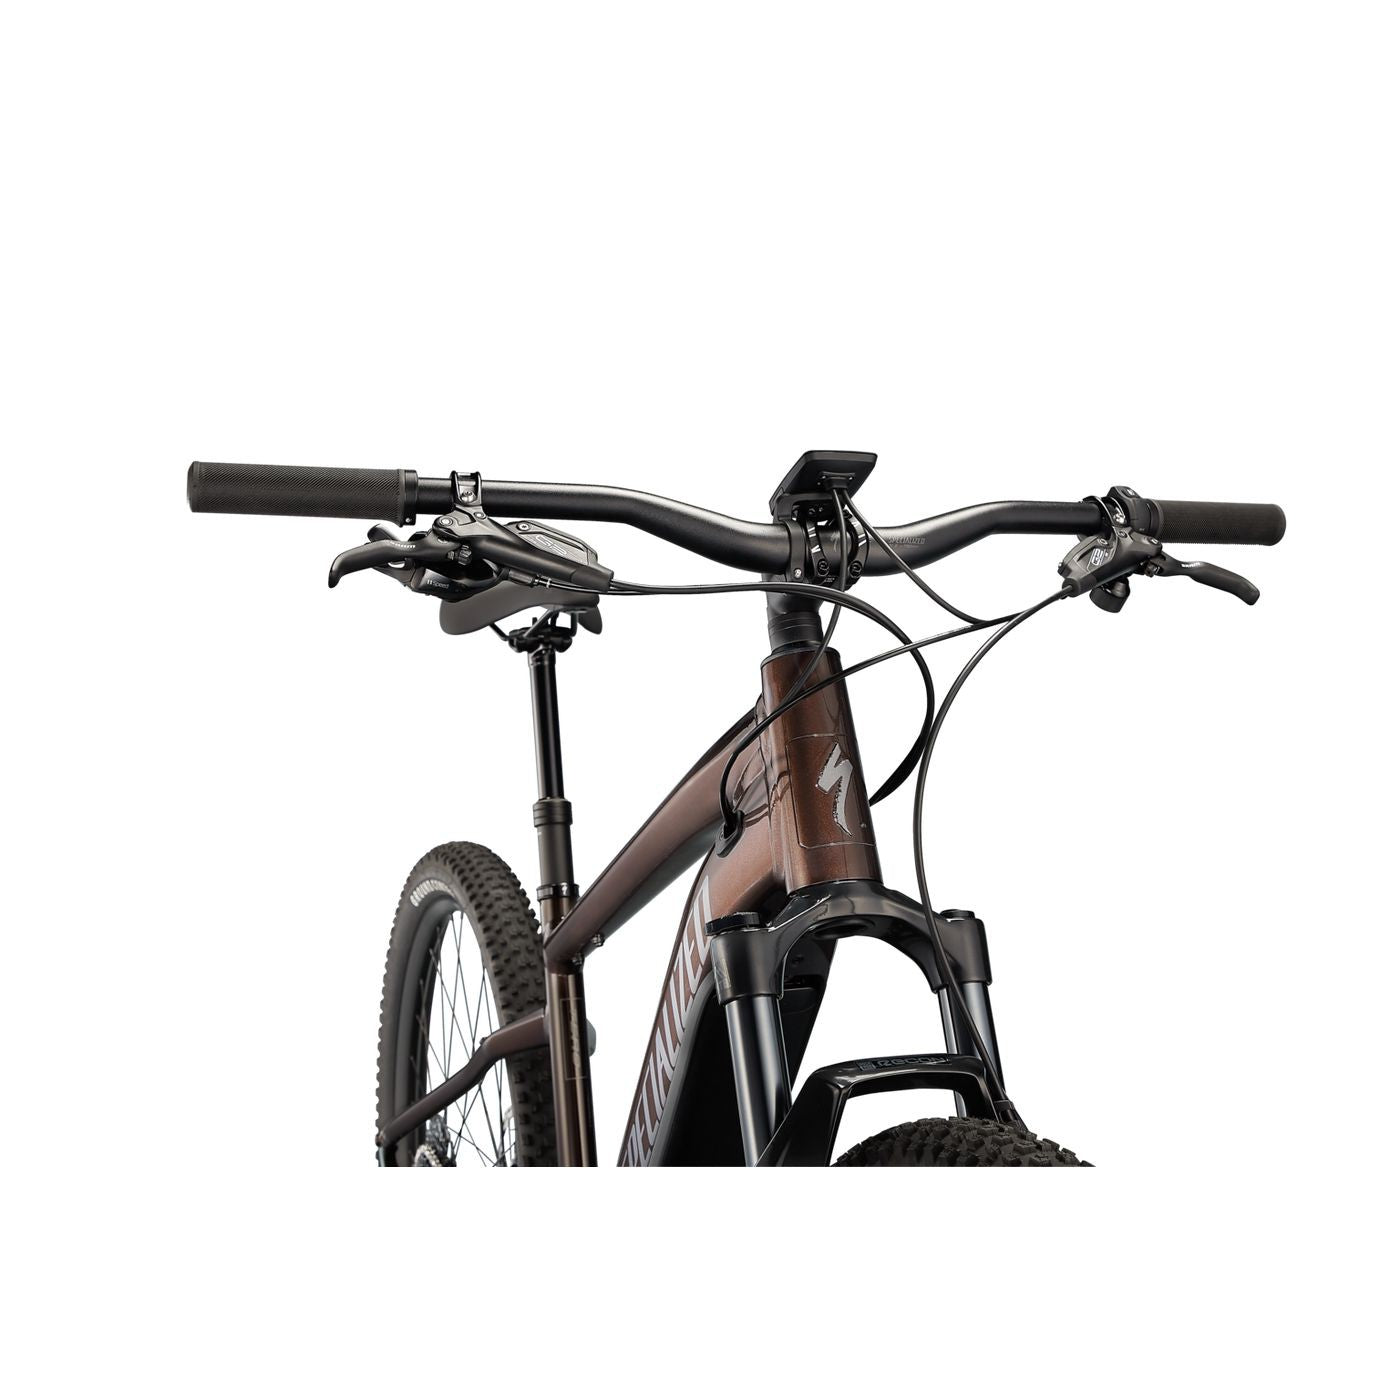 Specialized Turbo Tero 5.0 Active Electric Bike - Bikes - Bicycle Warehouse